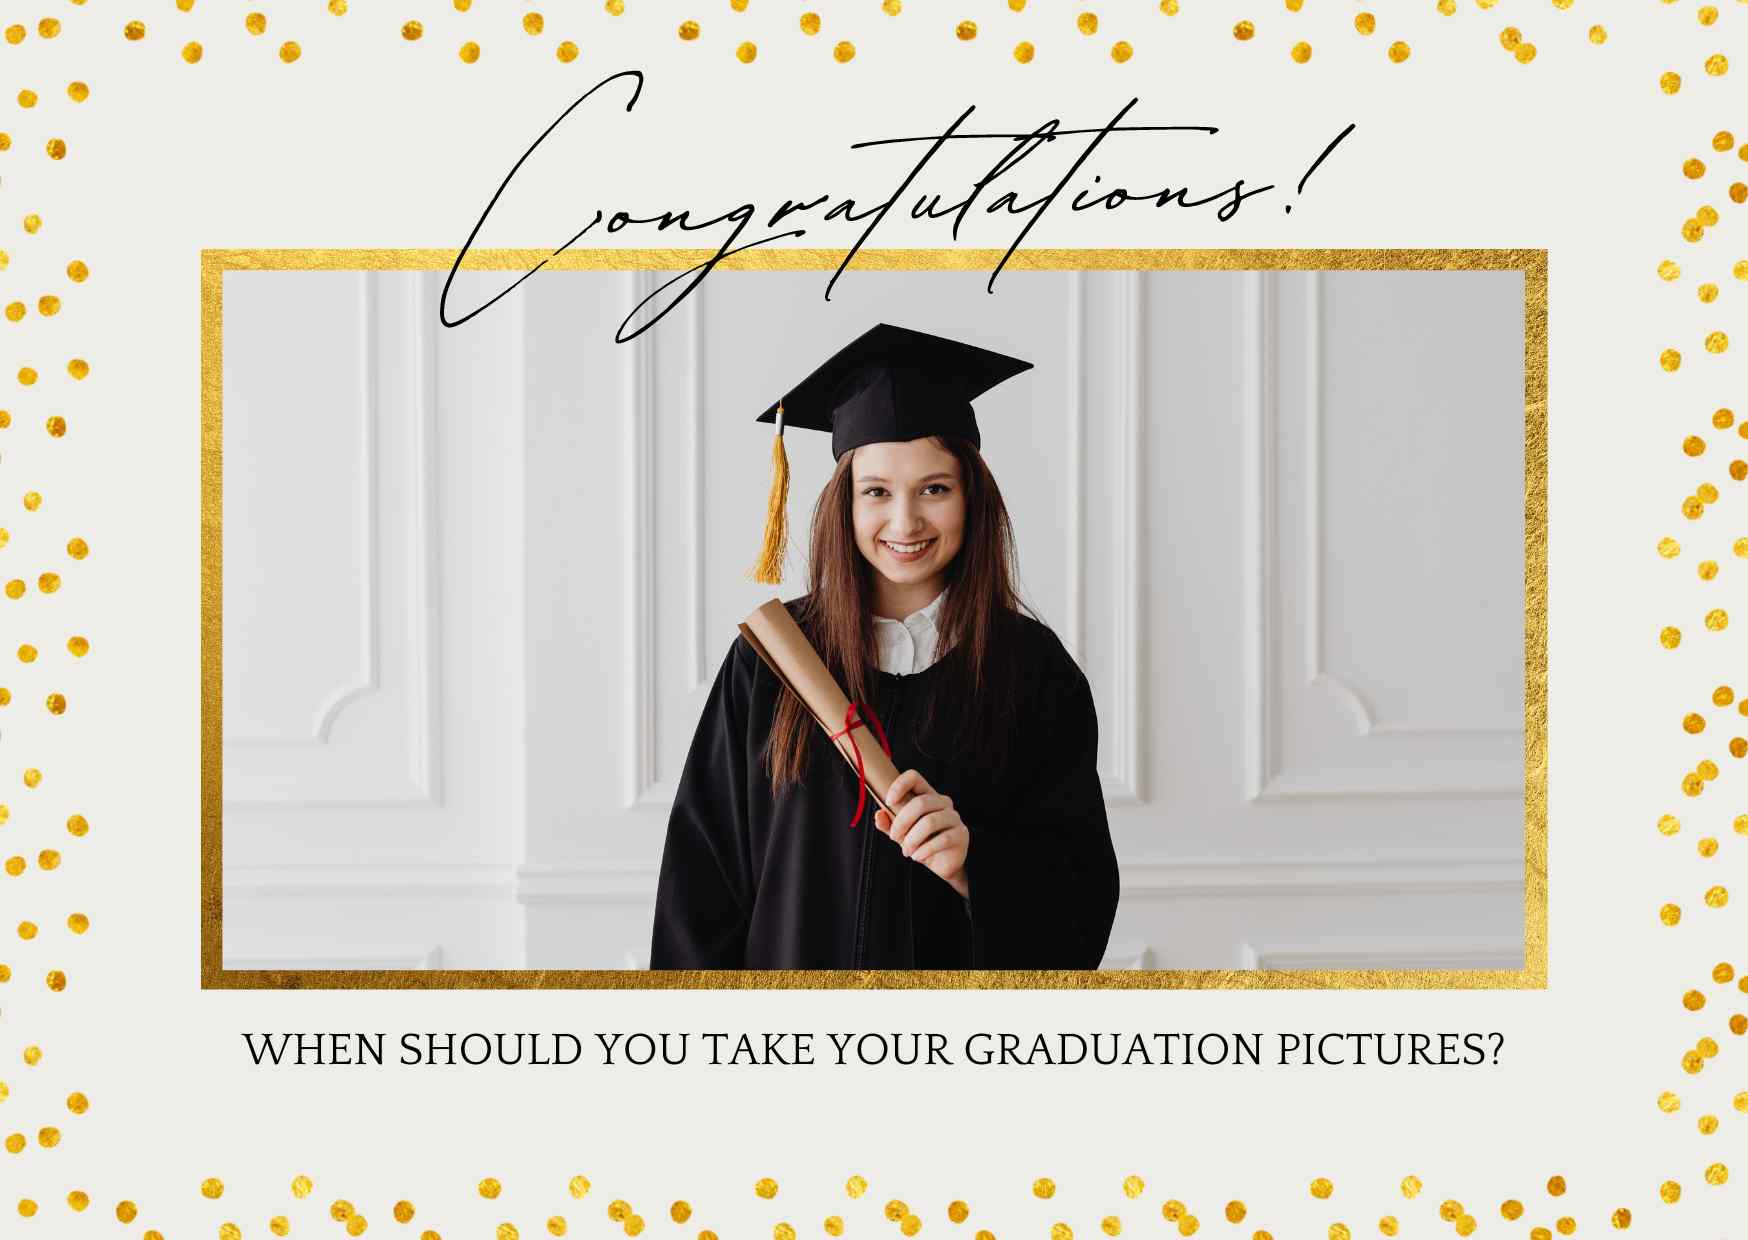 When Should You Take Your Graduation Pictures?